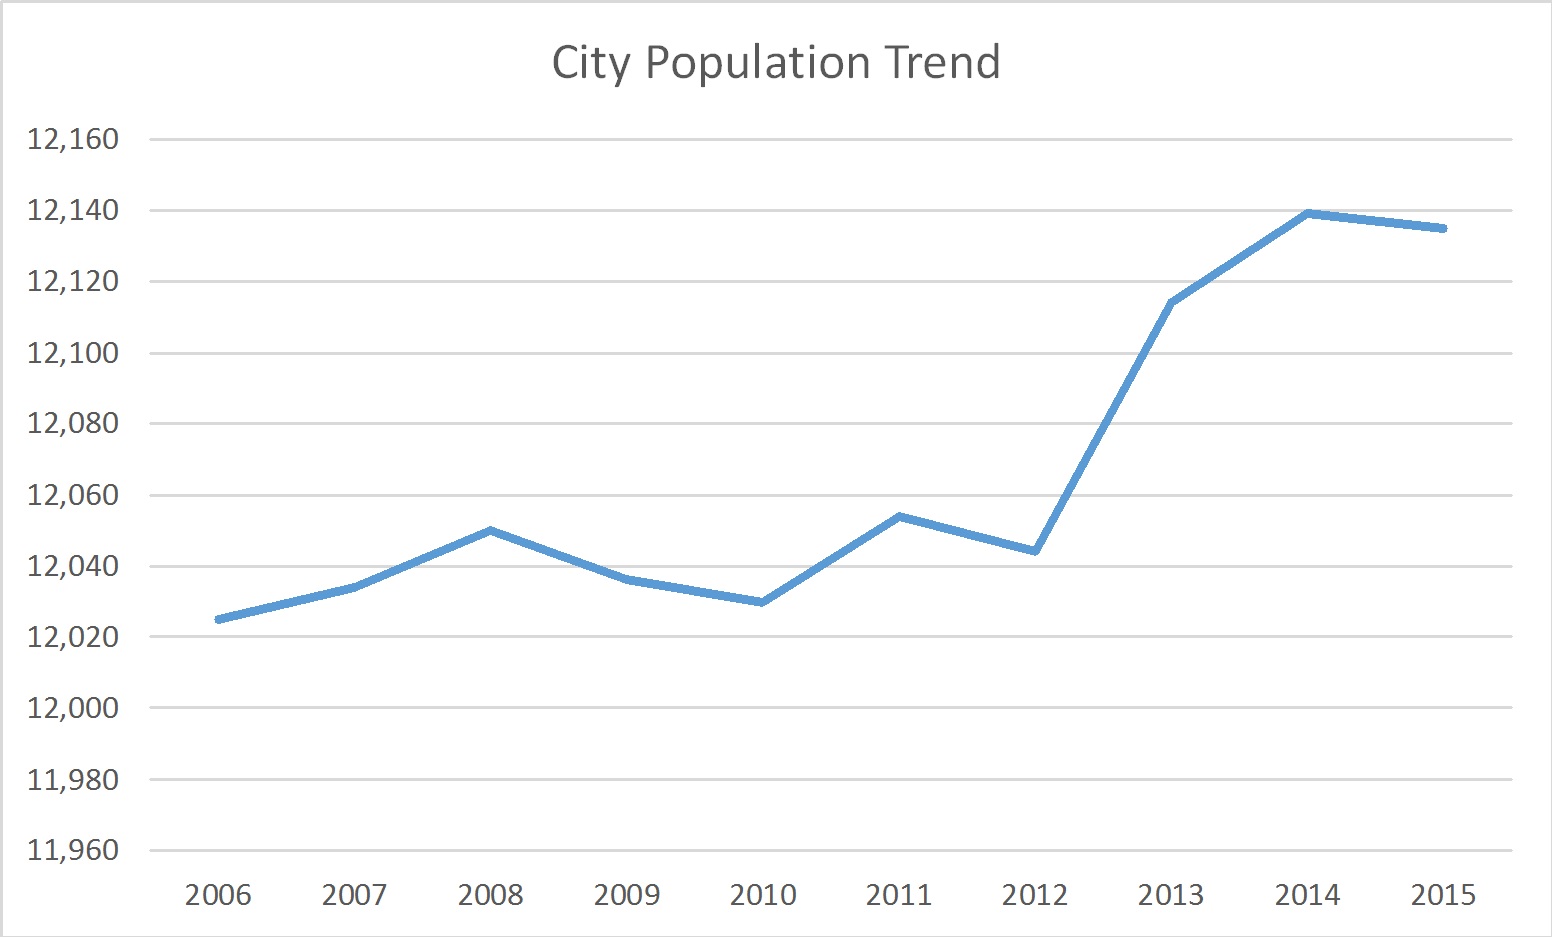 Amherst Ohio Population Trend | Russell Roberts Appraisals, Inc.